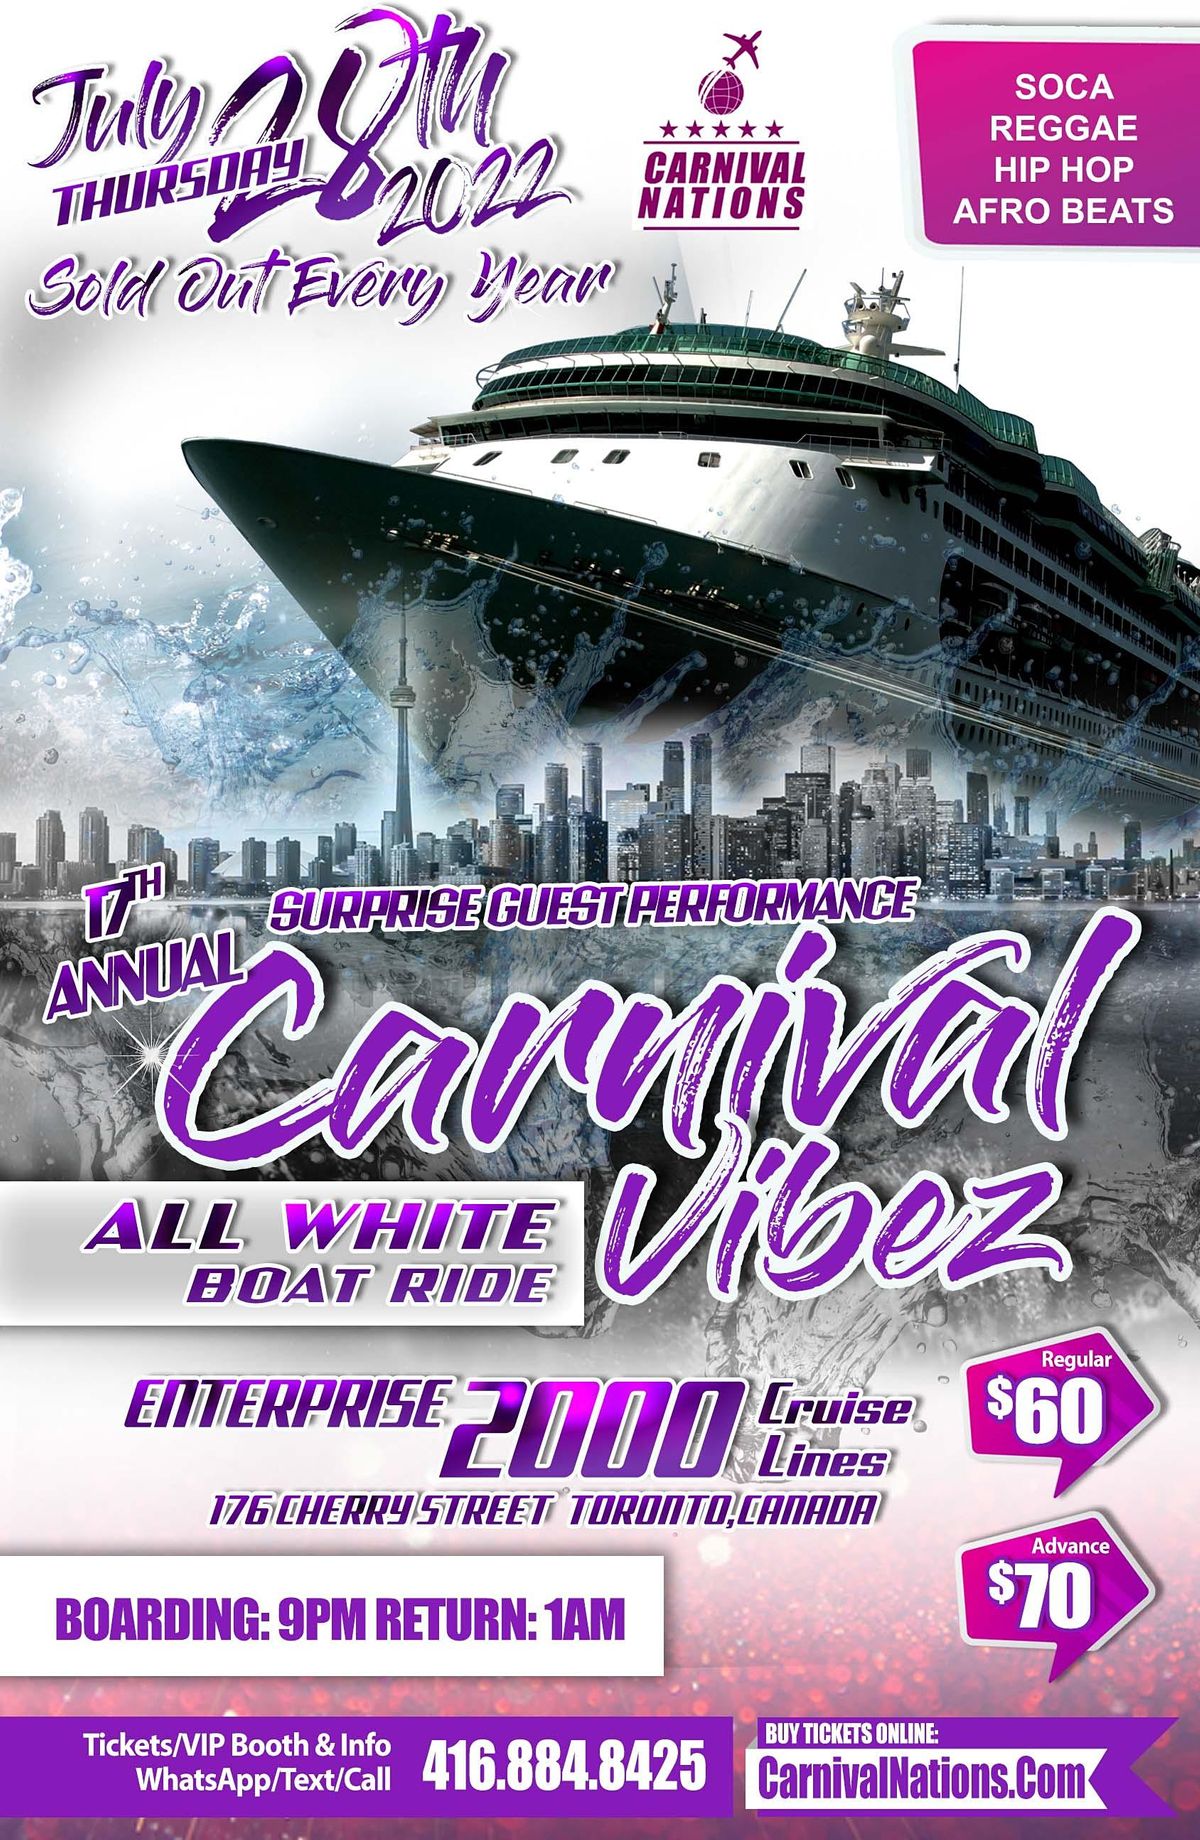 CARNIVAL VIBEZ ALL WHITE BOAT PARTY